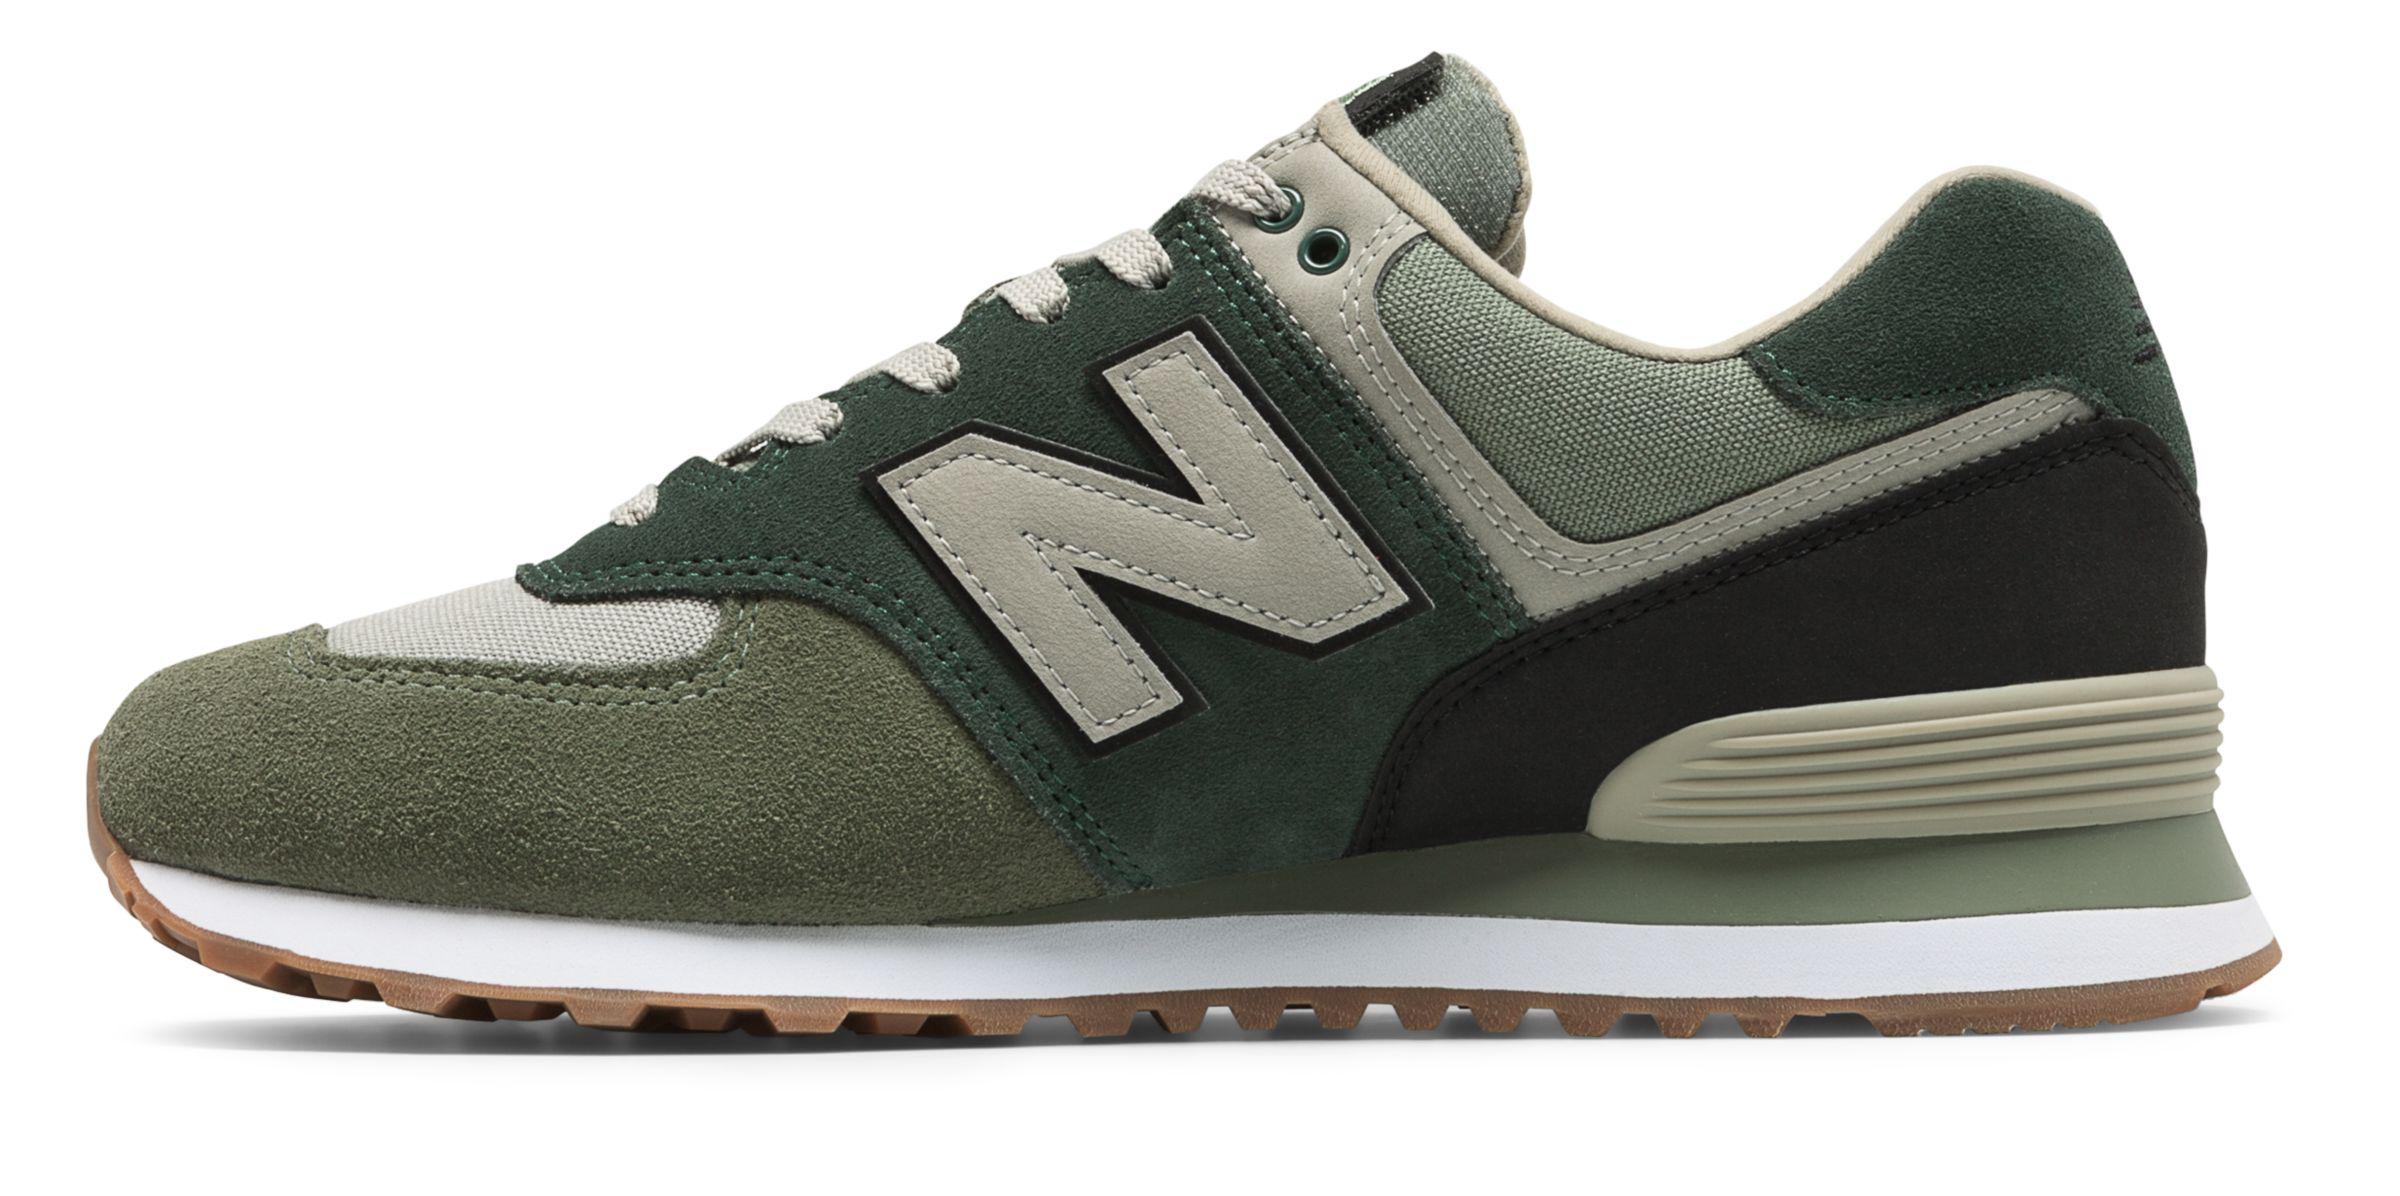 New Balance Suede 574 Military Patch in Green for Men - Lyst